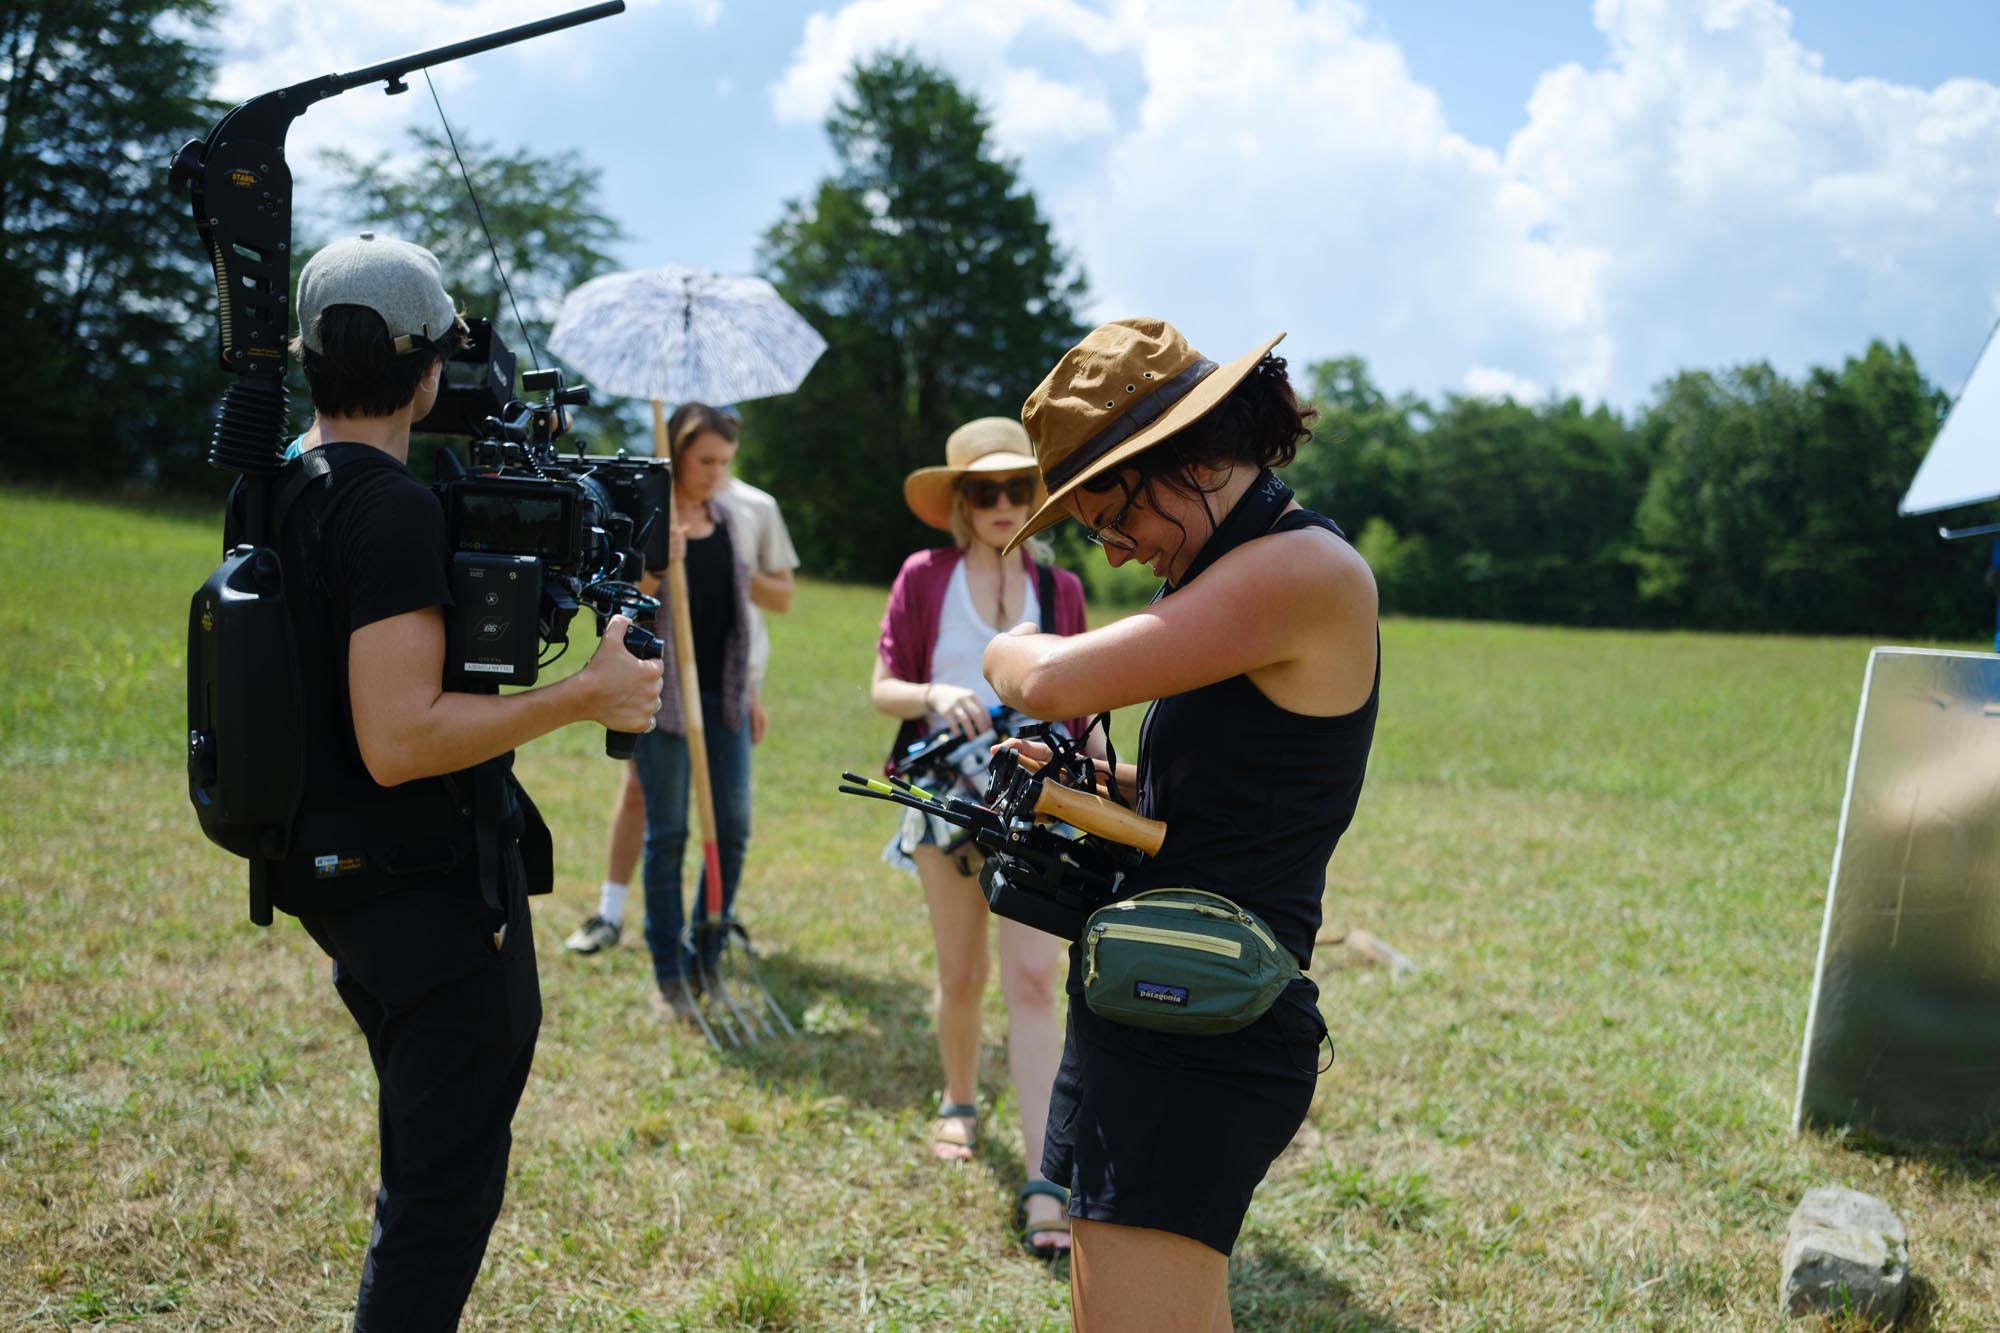 Rachael Porter checks a shot on her monitor in a grassy field